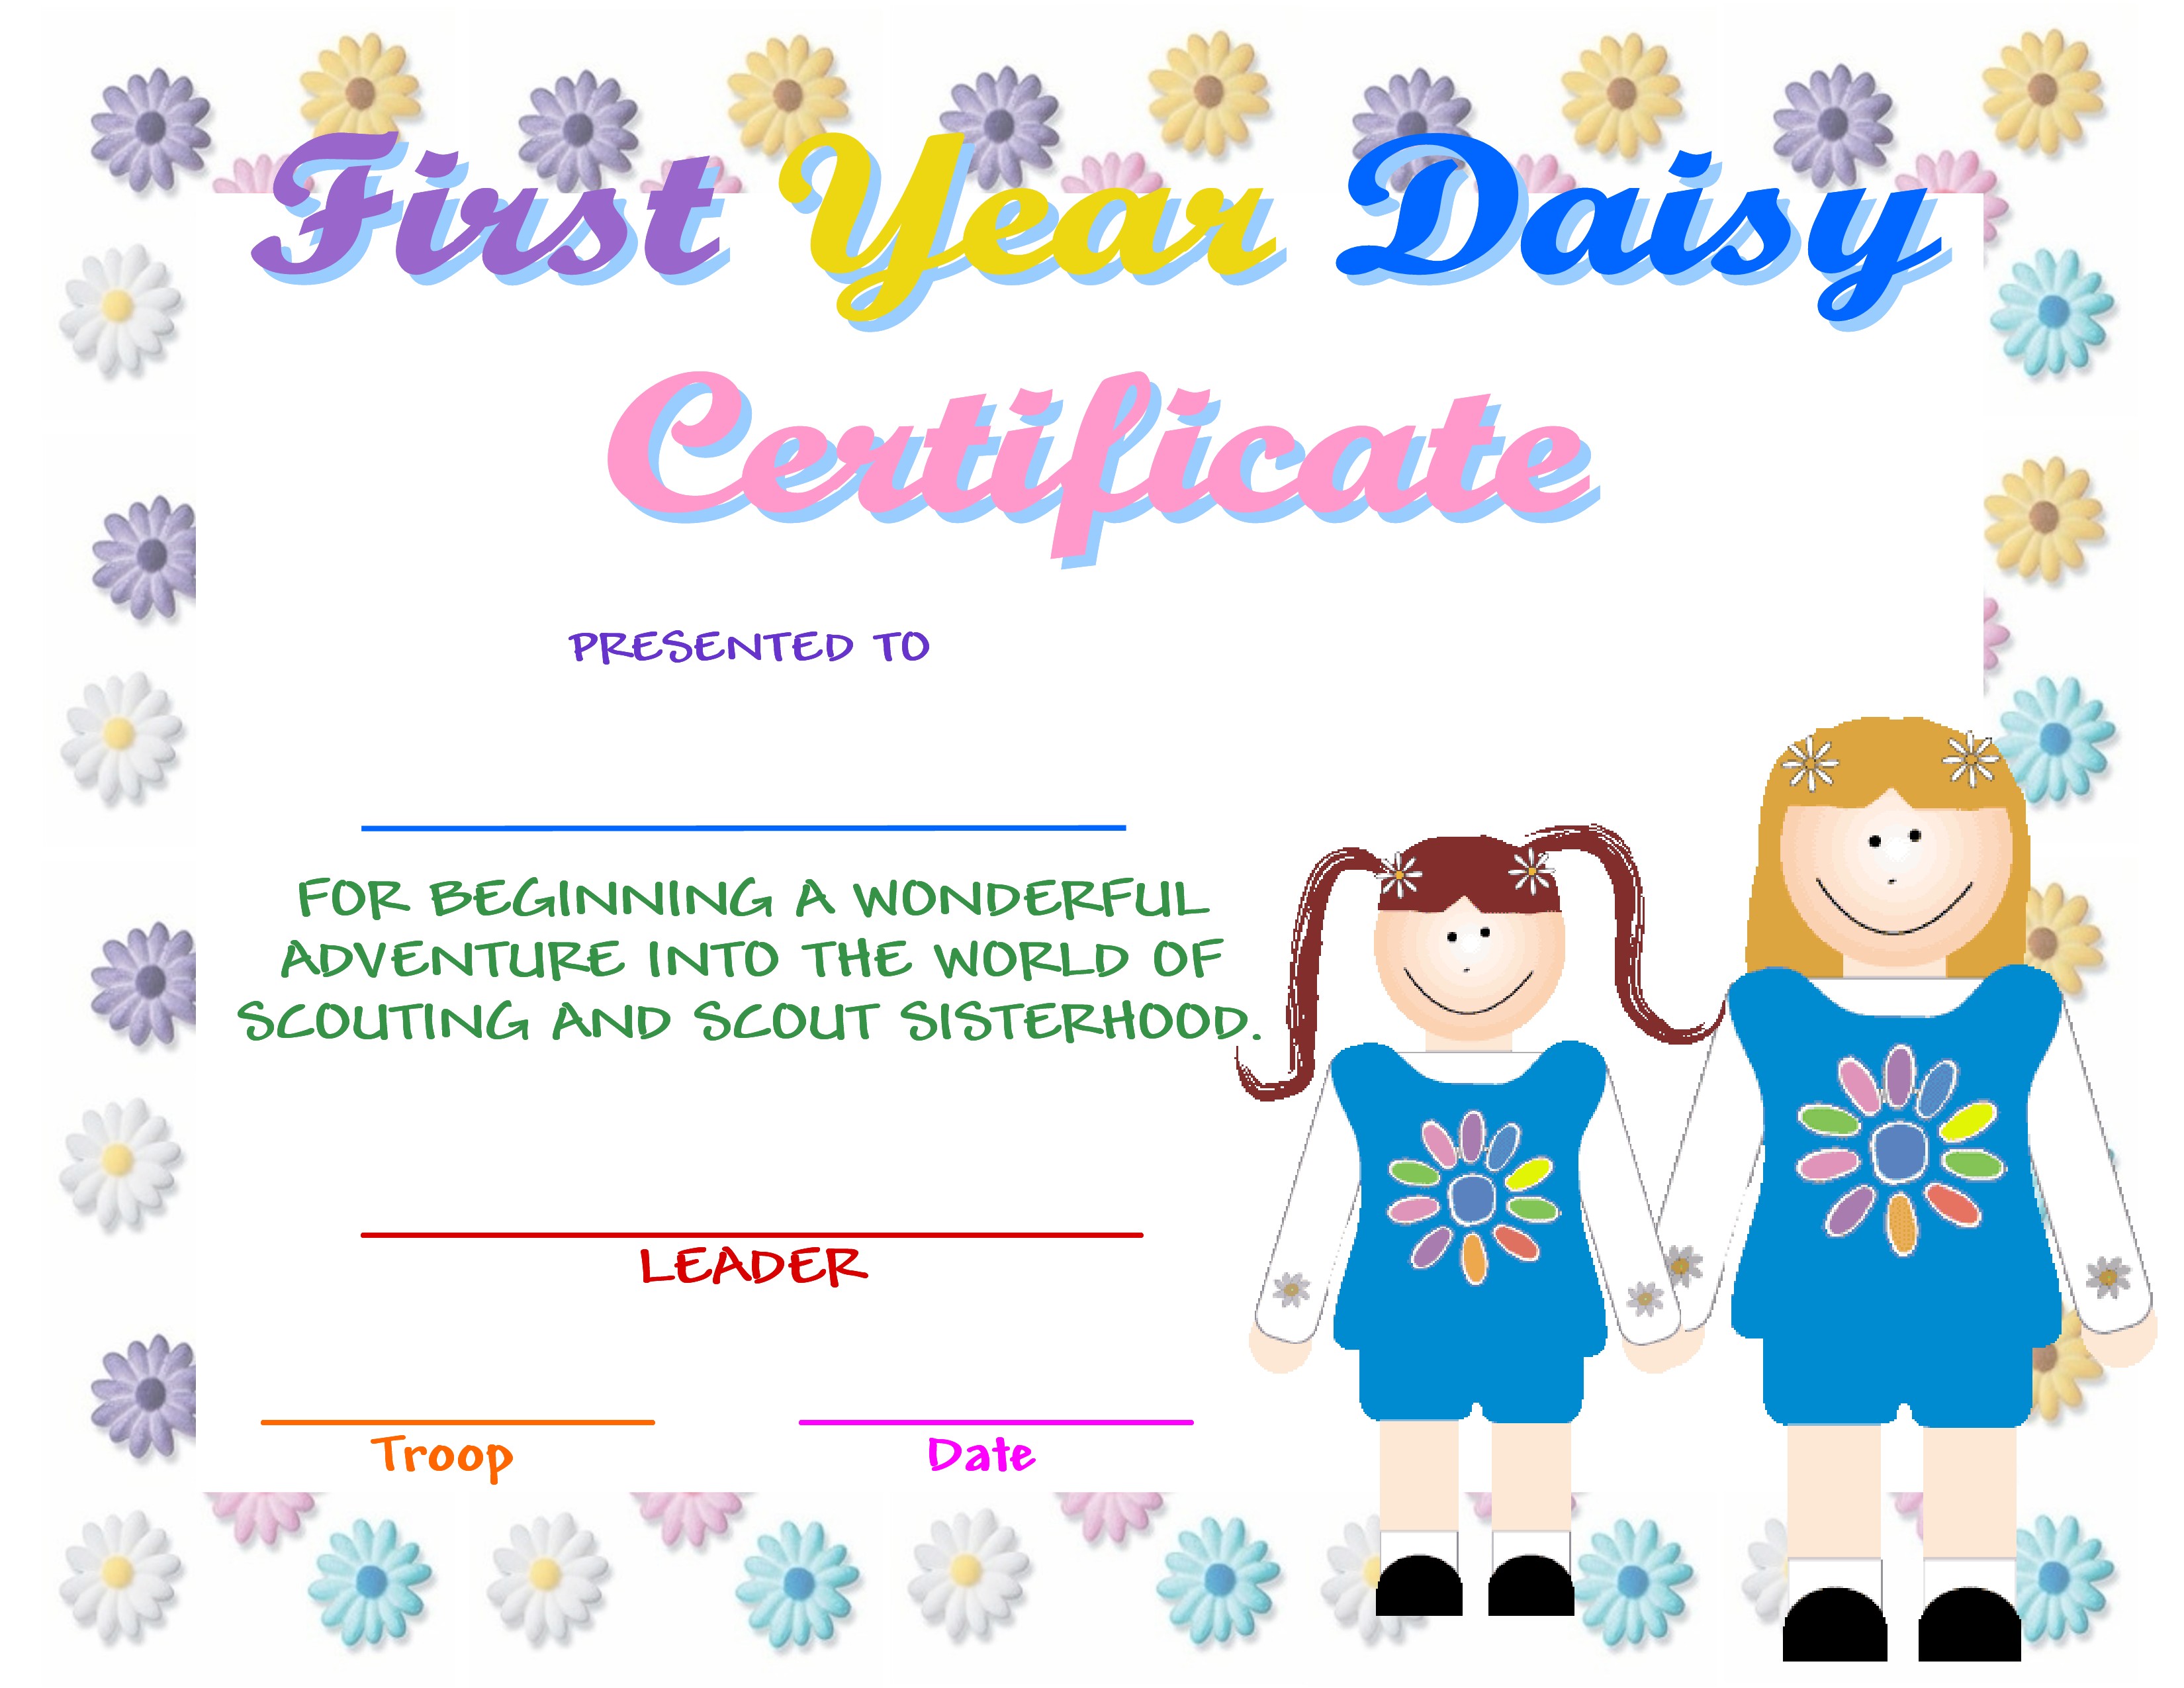 girl-scouts-daisy-welcome-certificate-ideas